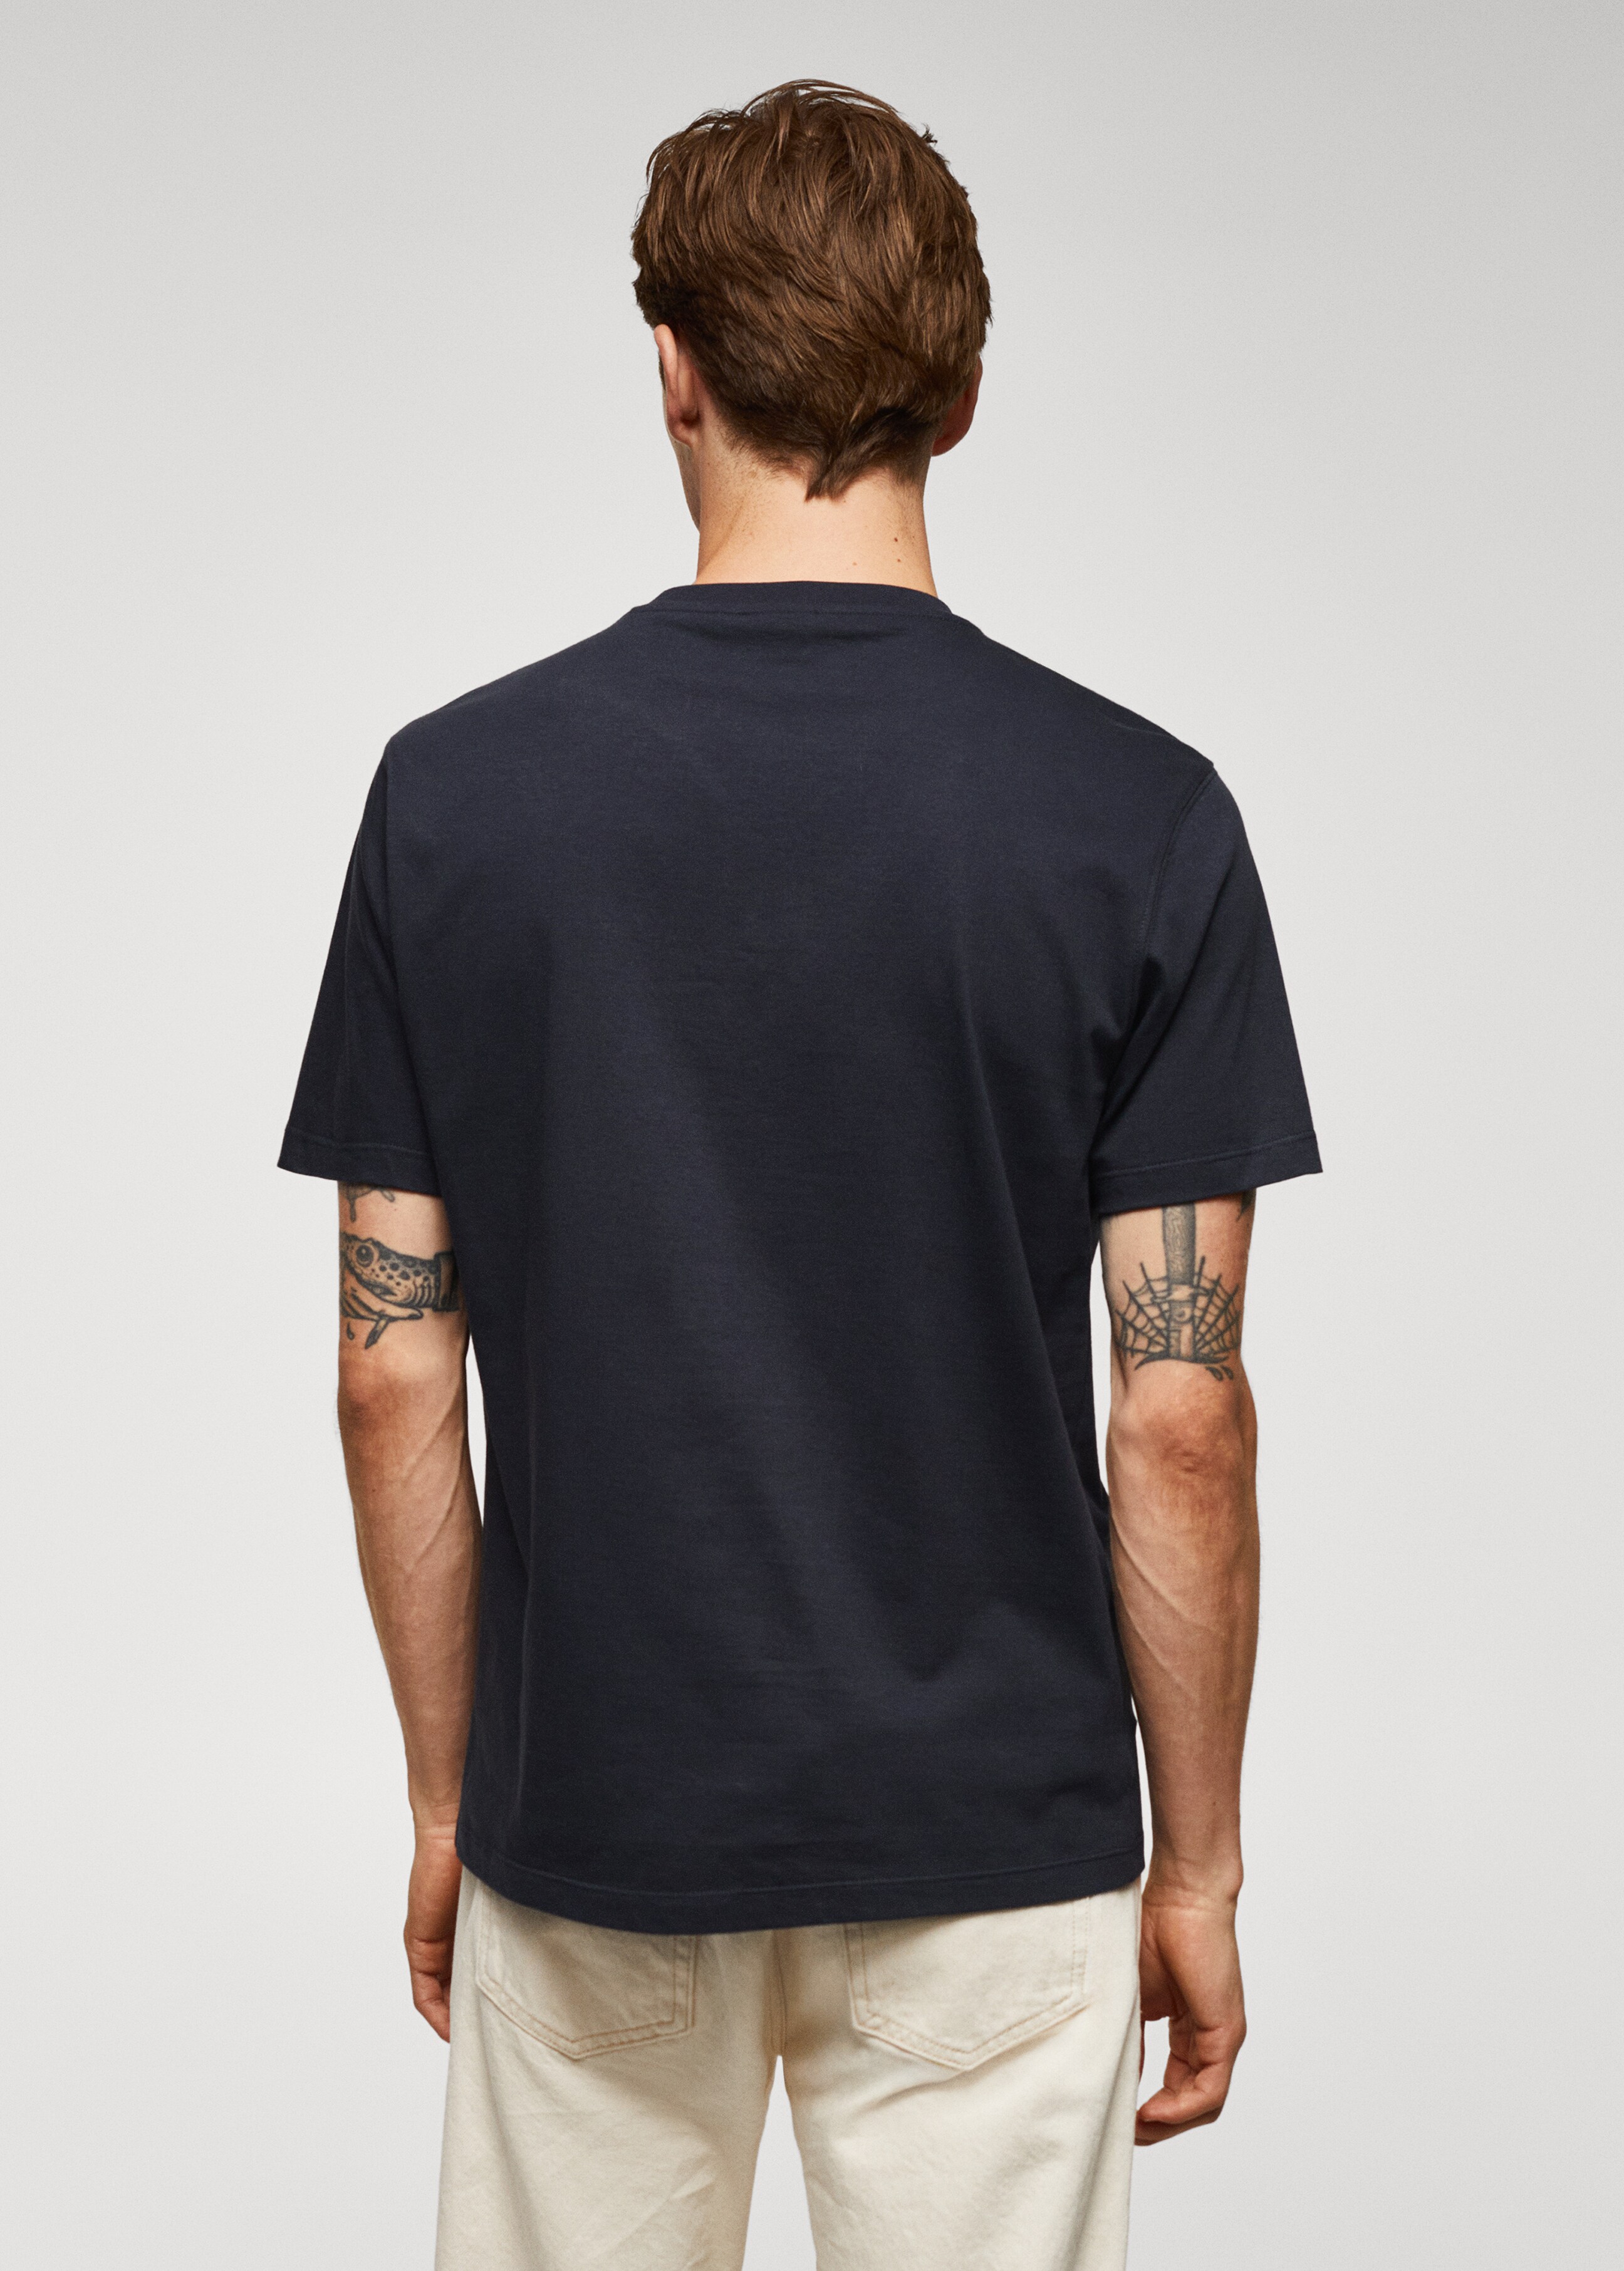 100% cotton printed t-shirt - Reverse of the article